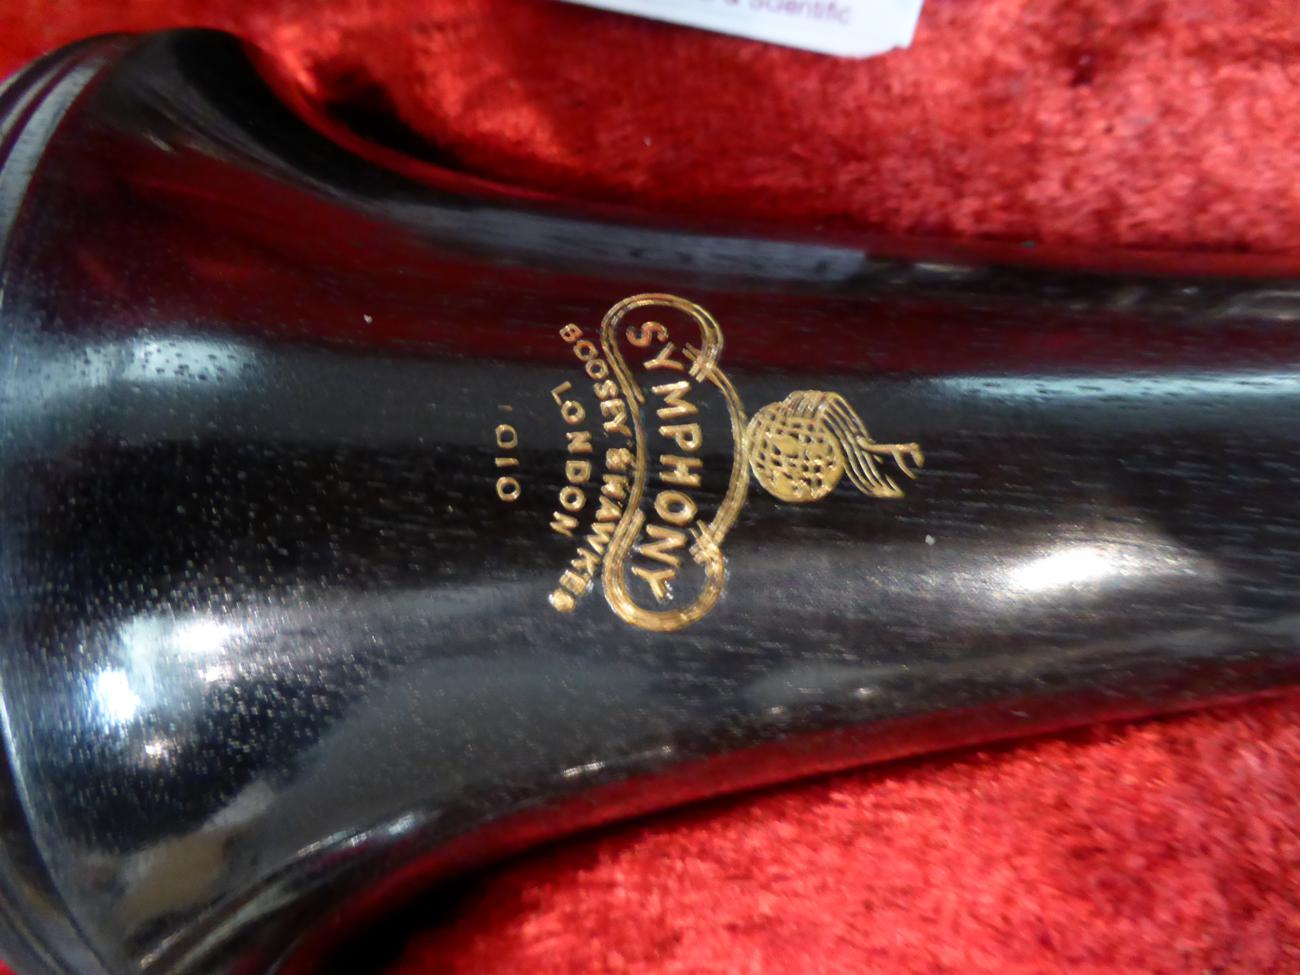 Boosey & Hawkes Symphony 1010 Clarinet with original barrel and No.2 B&H 1010 mouthpiece, fitted - Image 3 of 12